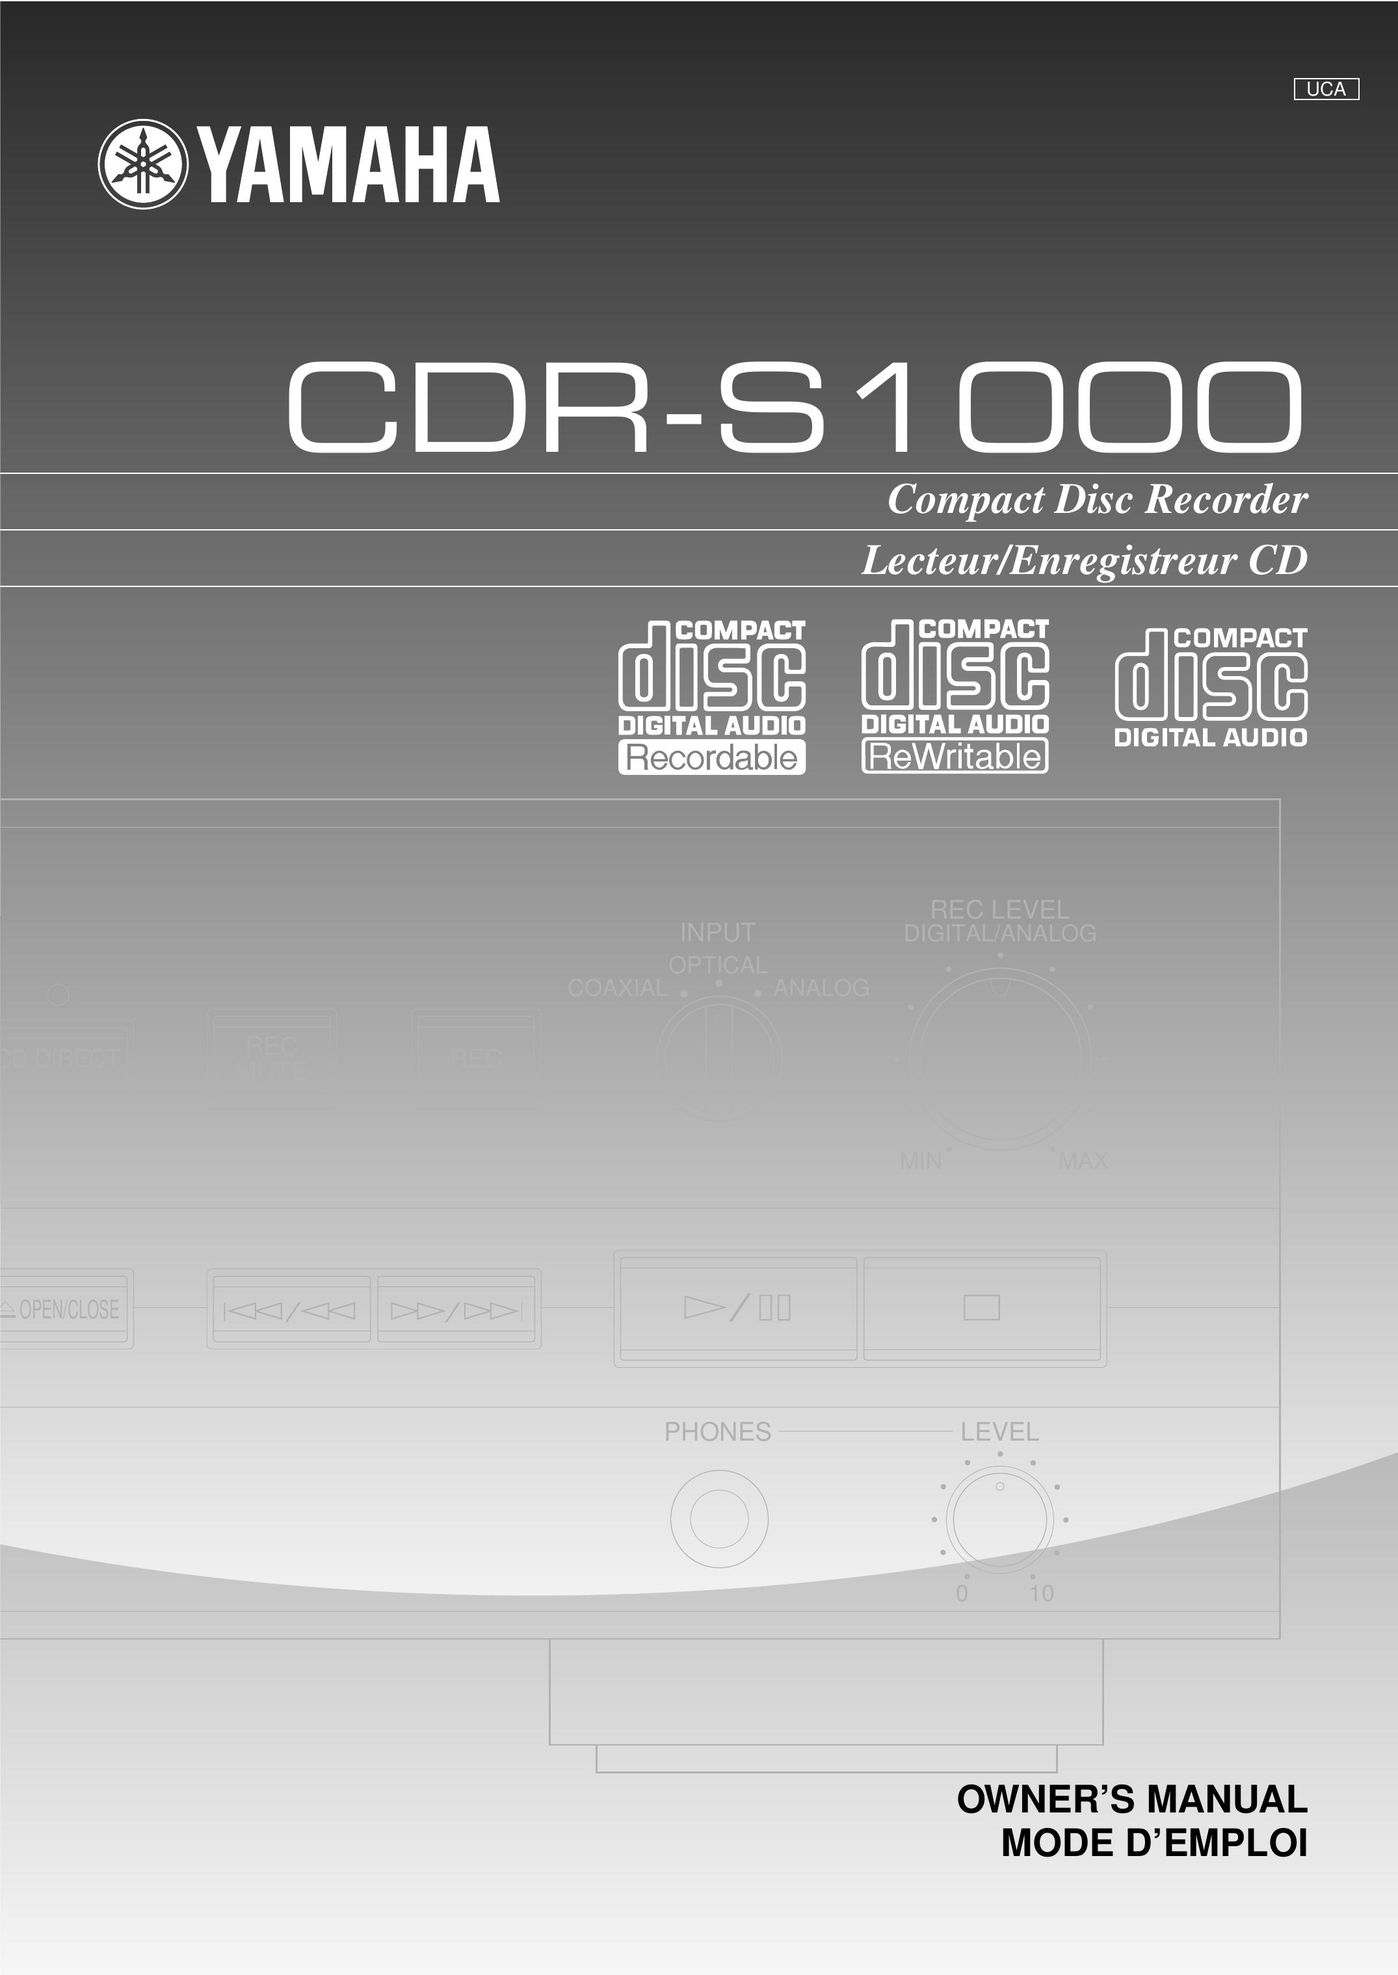 Yamaha CDR-S1000 Stereo System User Manual